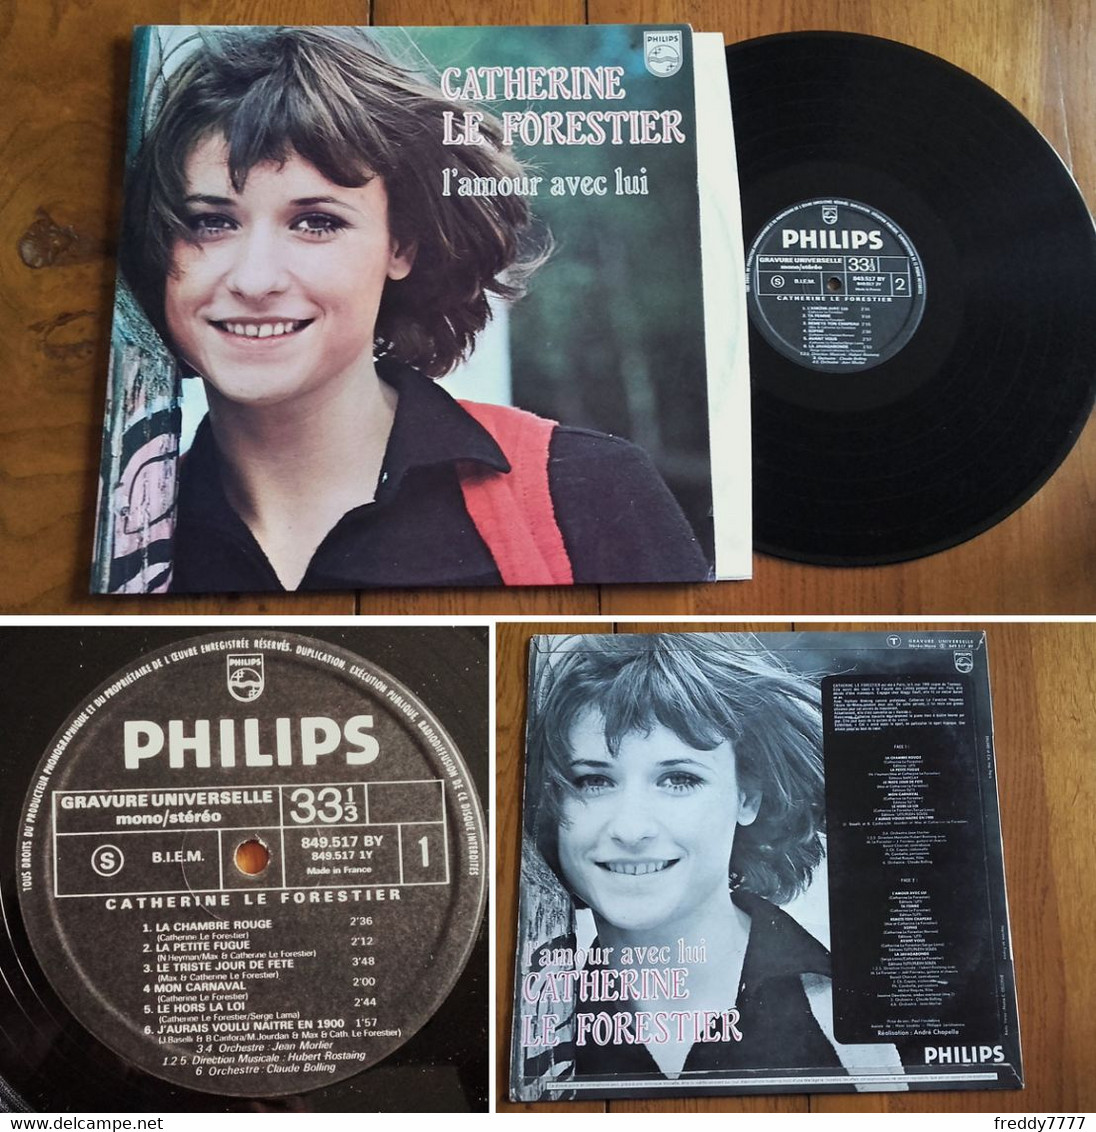 RARE French LP 33t RPM BIEM (12") CATHERINE LE FORESTIER (1969) - Collector's Editions